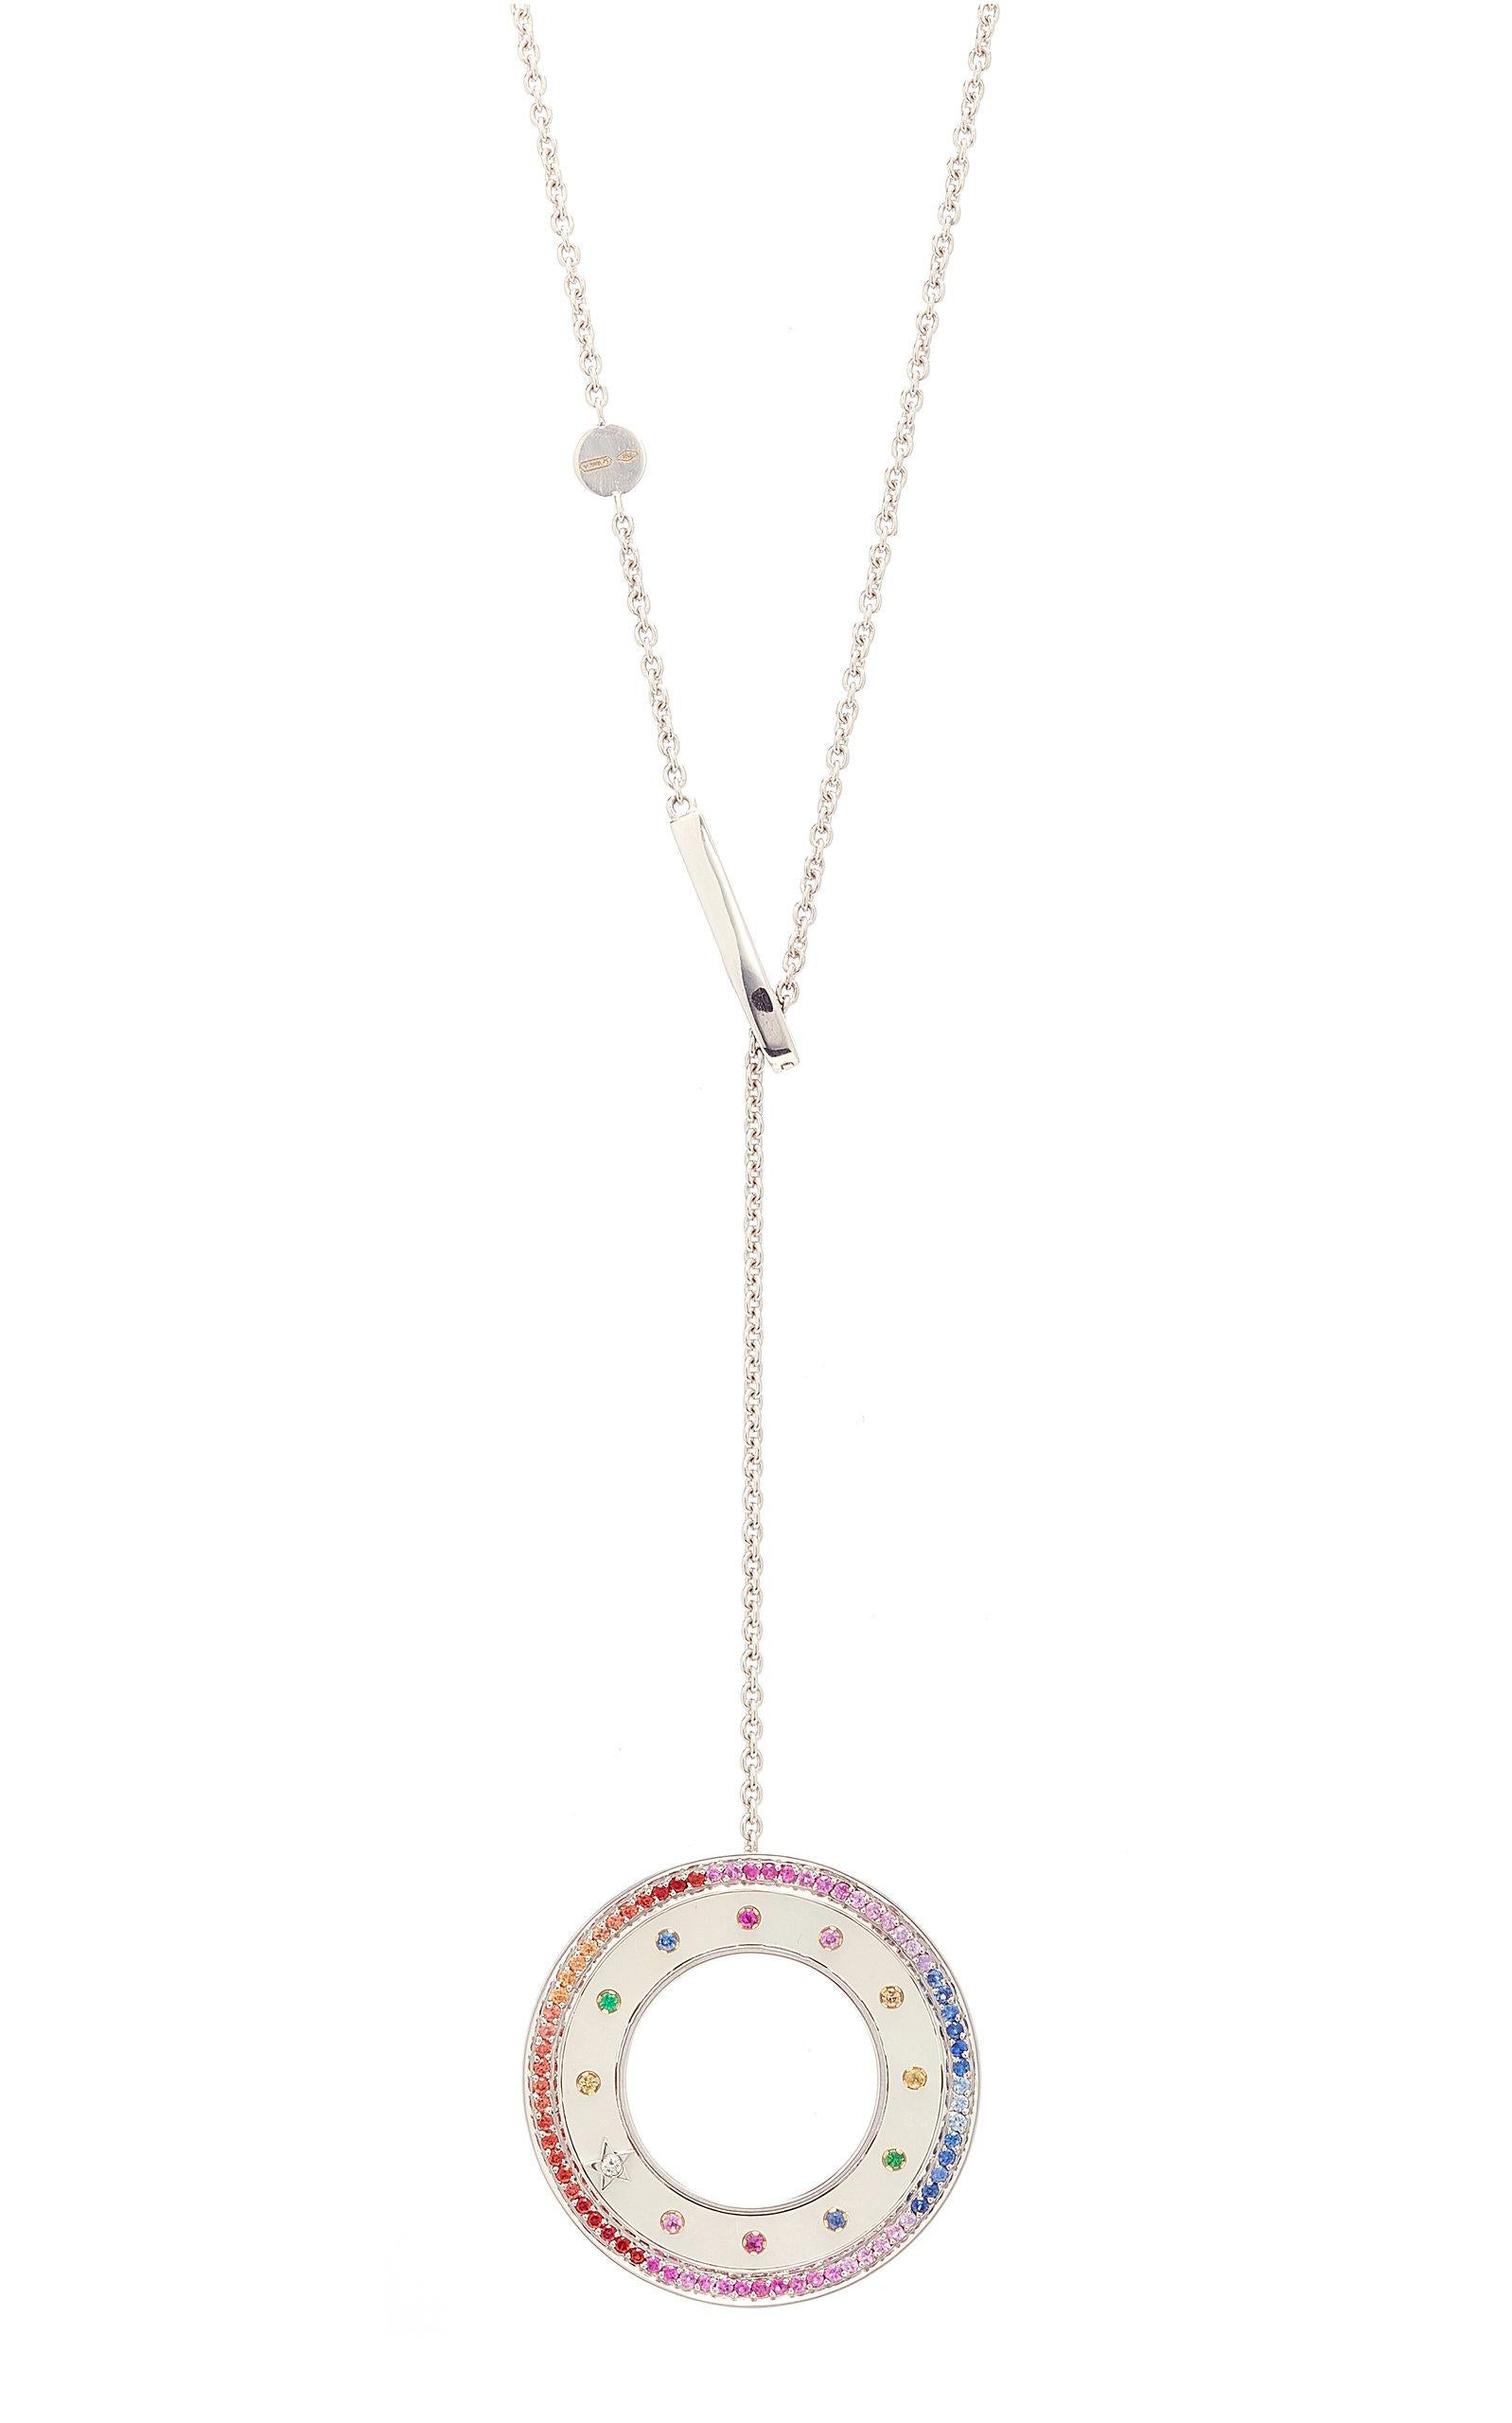 Anna Maccieri Rossi's 'ORA Rainbow Pendant' features a circular pendant where the concept of time is emphasized by the sequence and rhythm of the multicolored sapphires. The hours of the day are marked by multicolored sapphires and diamond star at 8